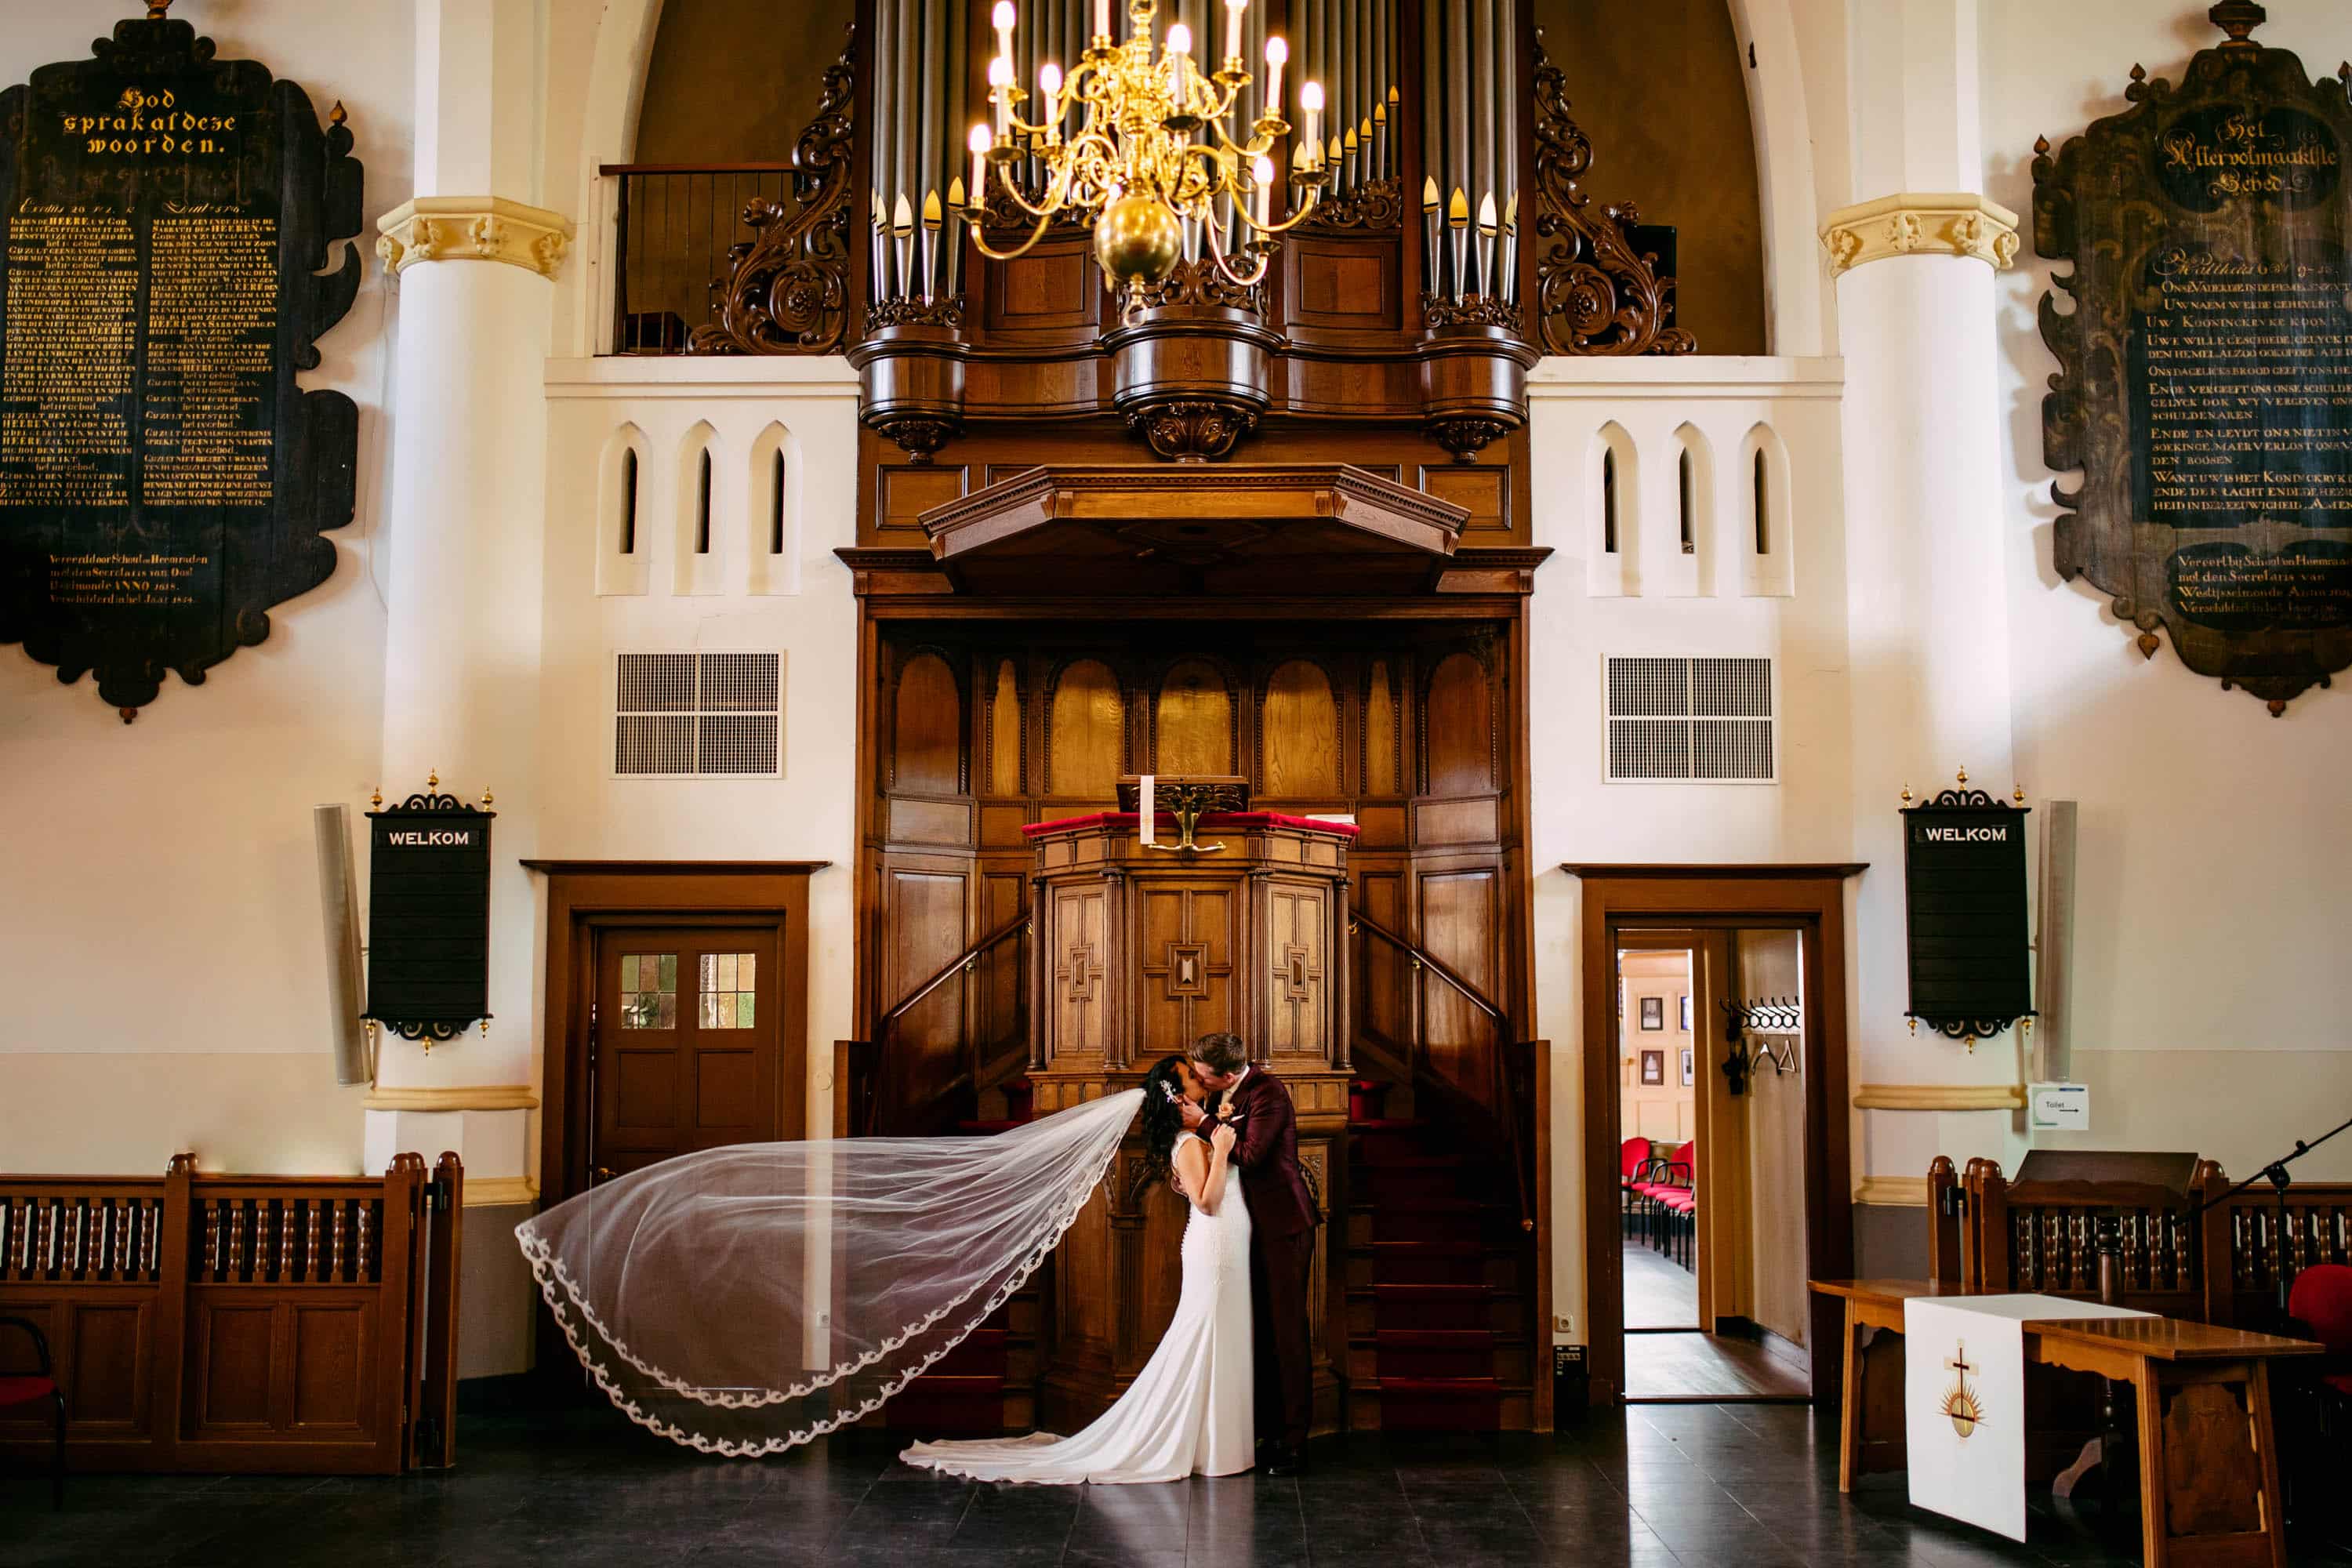 A bride standing with a veil in front of an ornate church.